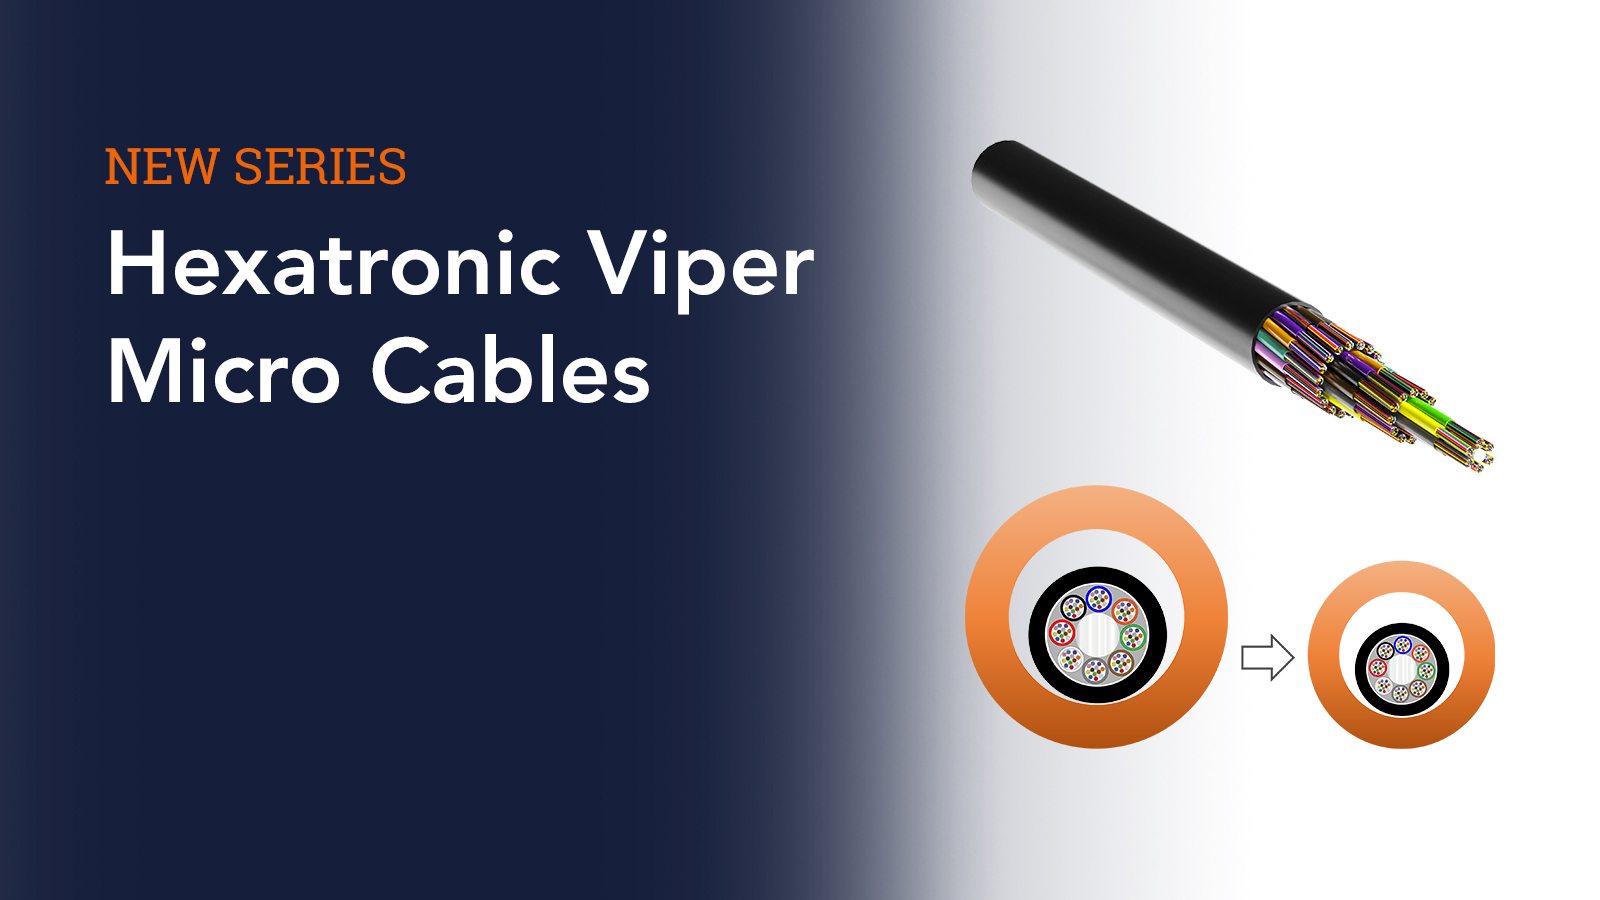 Hexatronic presents a new series of super slim micro cables